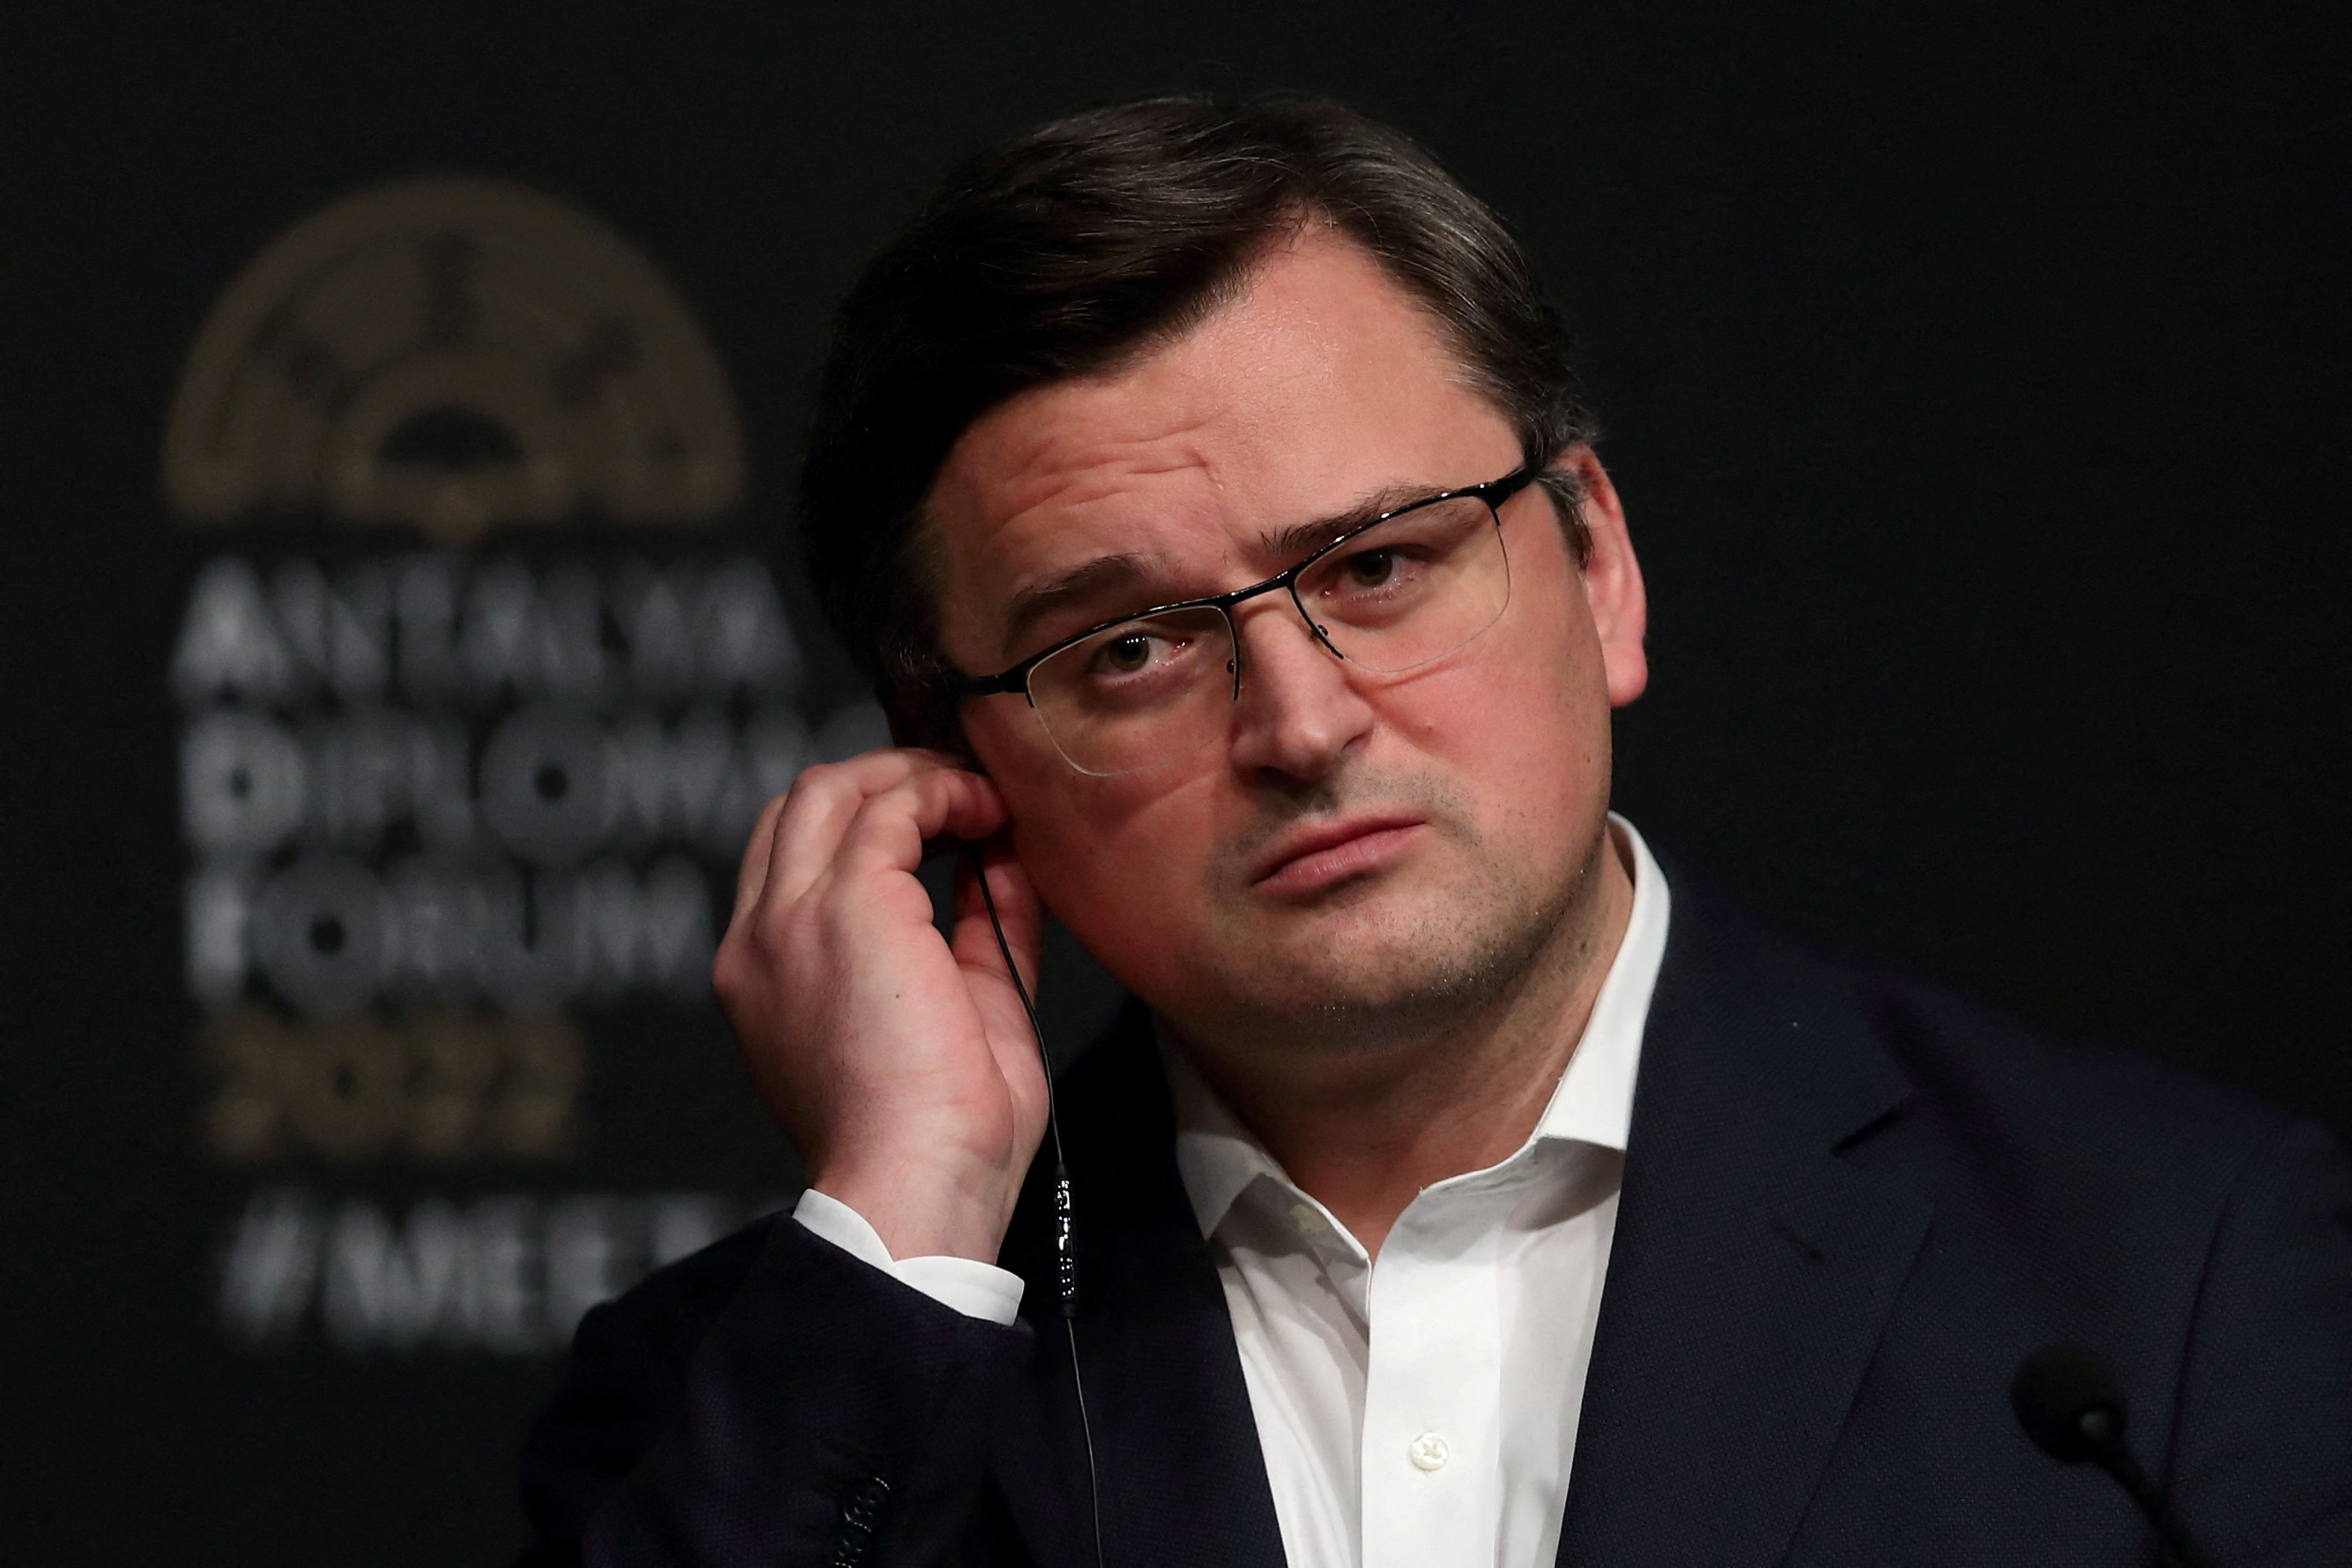 Ukrainian Foreign Minister Kuleba attends a news conference in Antalya